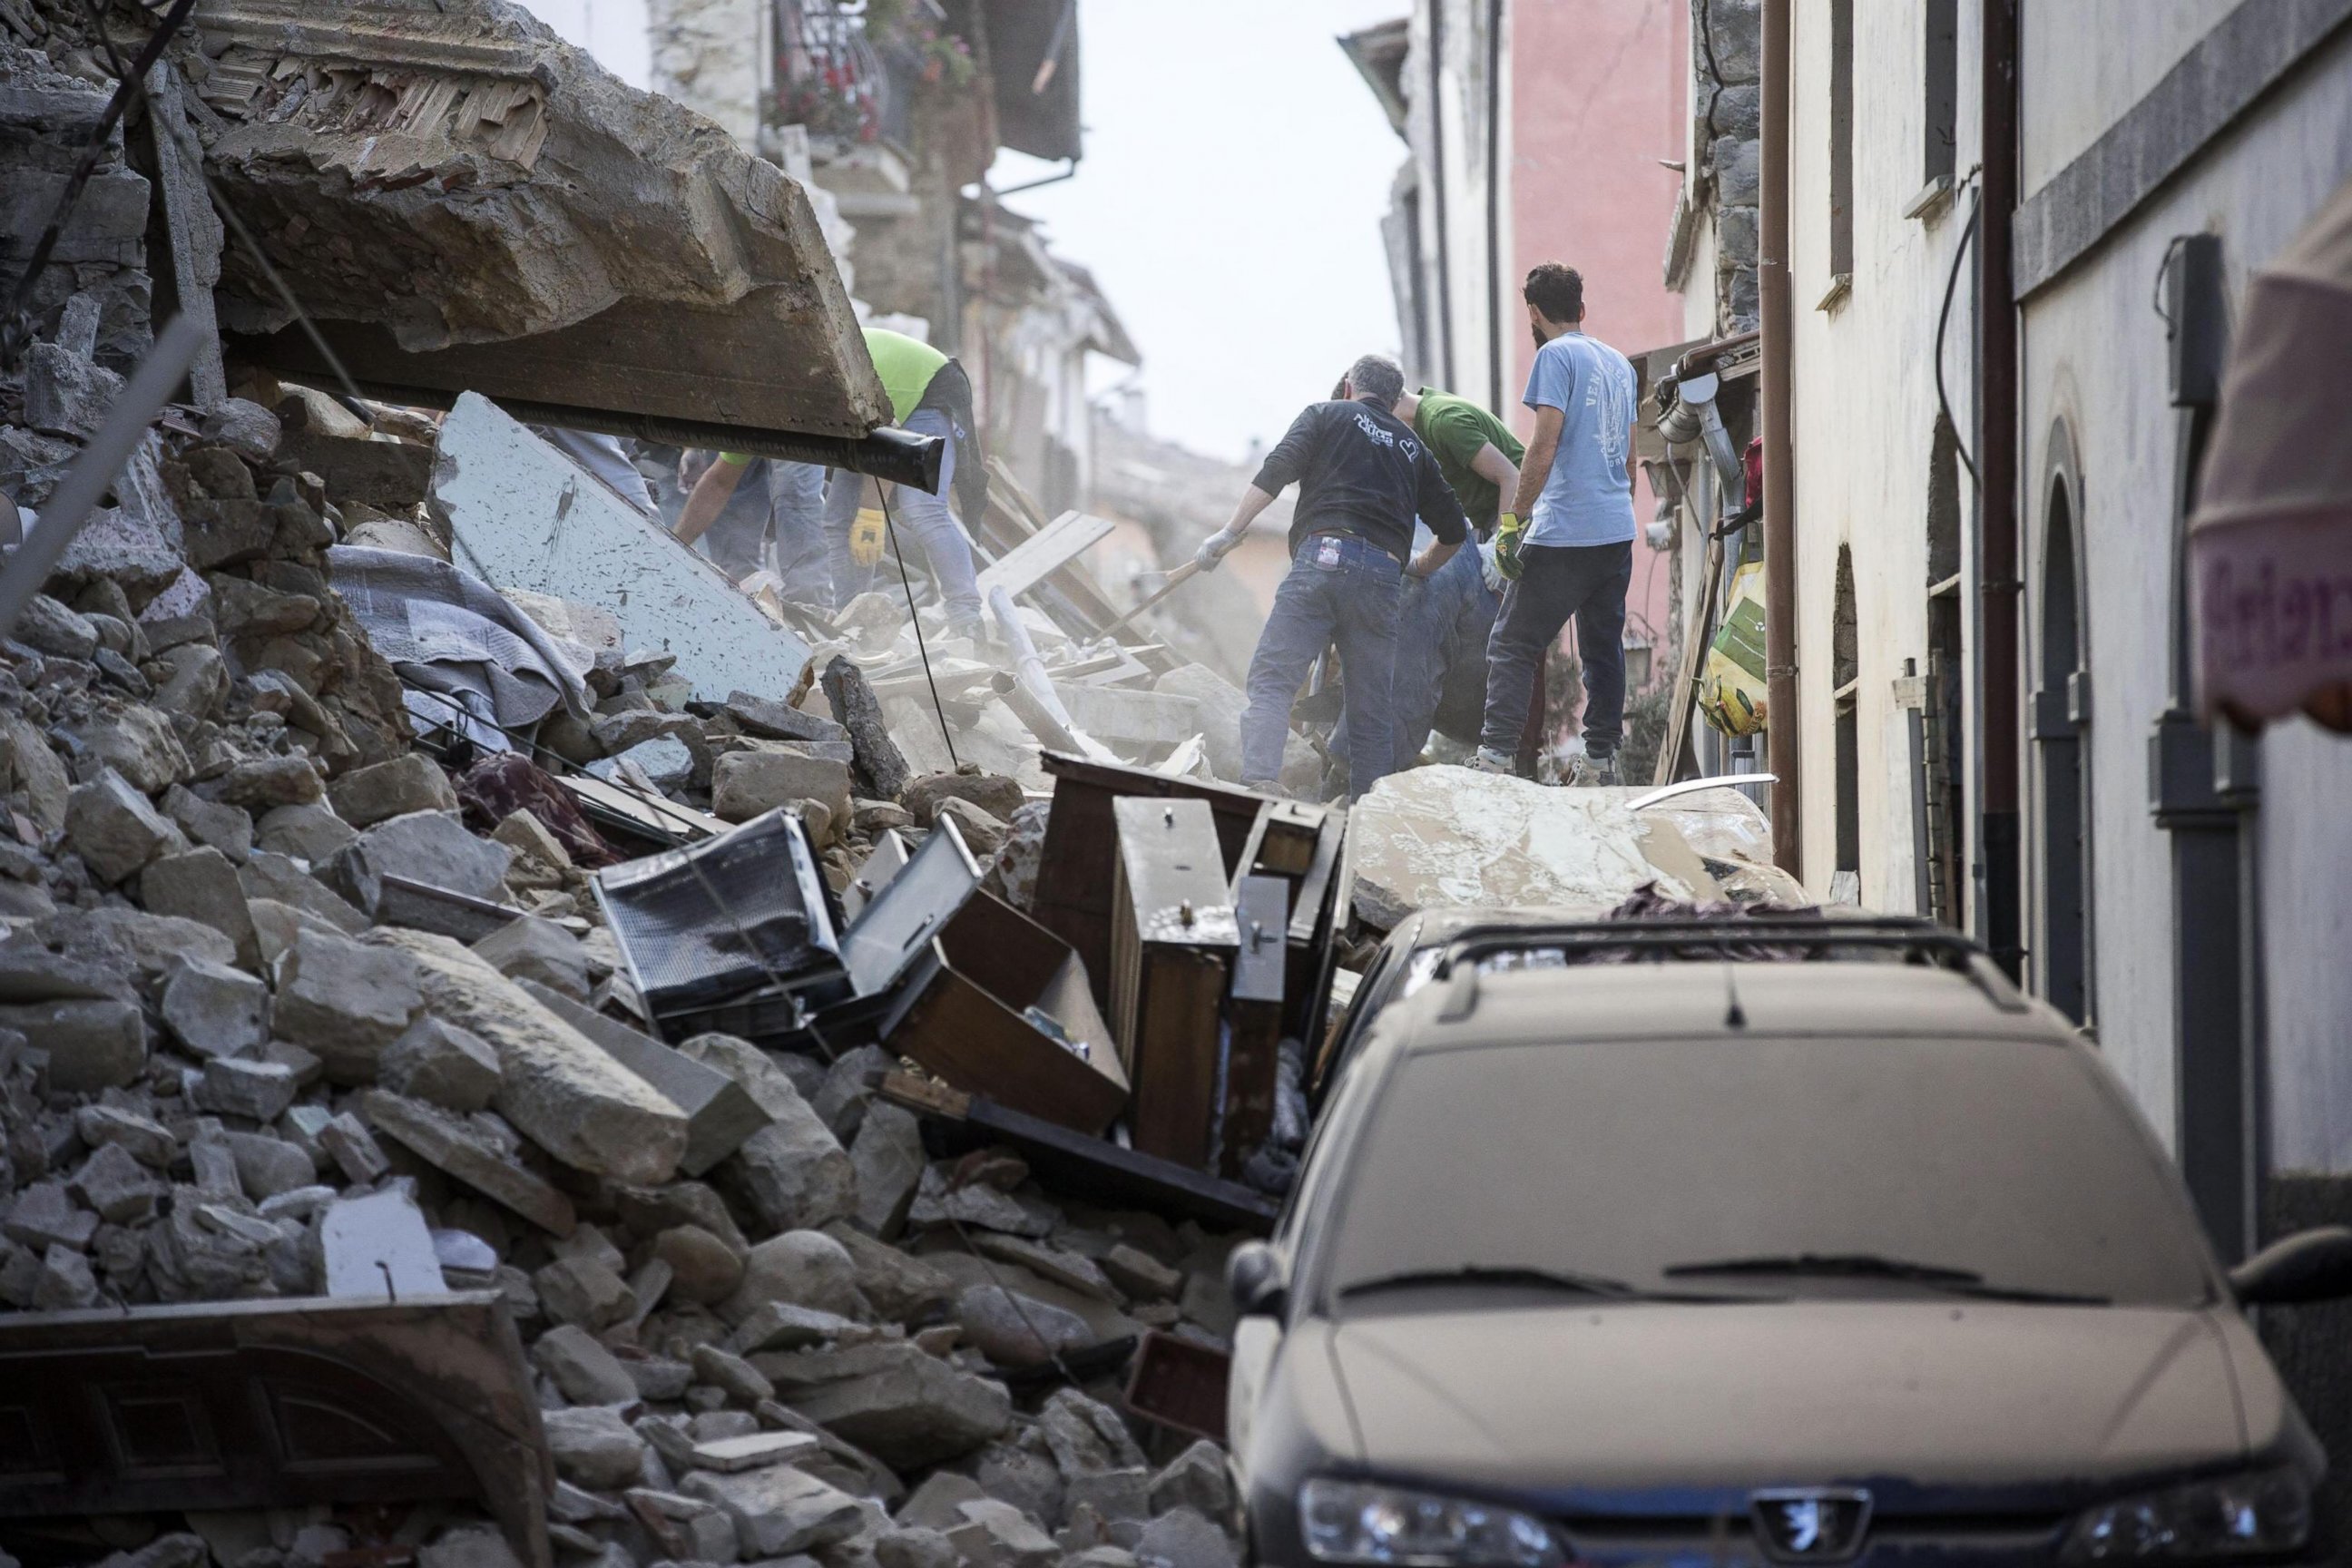 PHOTO: Search and rescue teams search for missing people amid the rubble of collapsed buildings in Amatrice, Italy, Aug. 24, 2016.